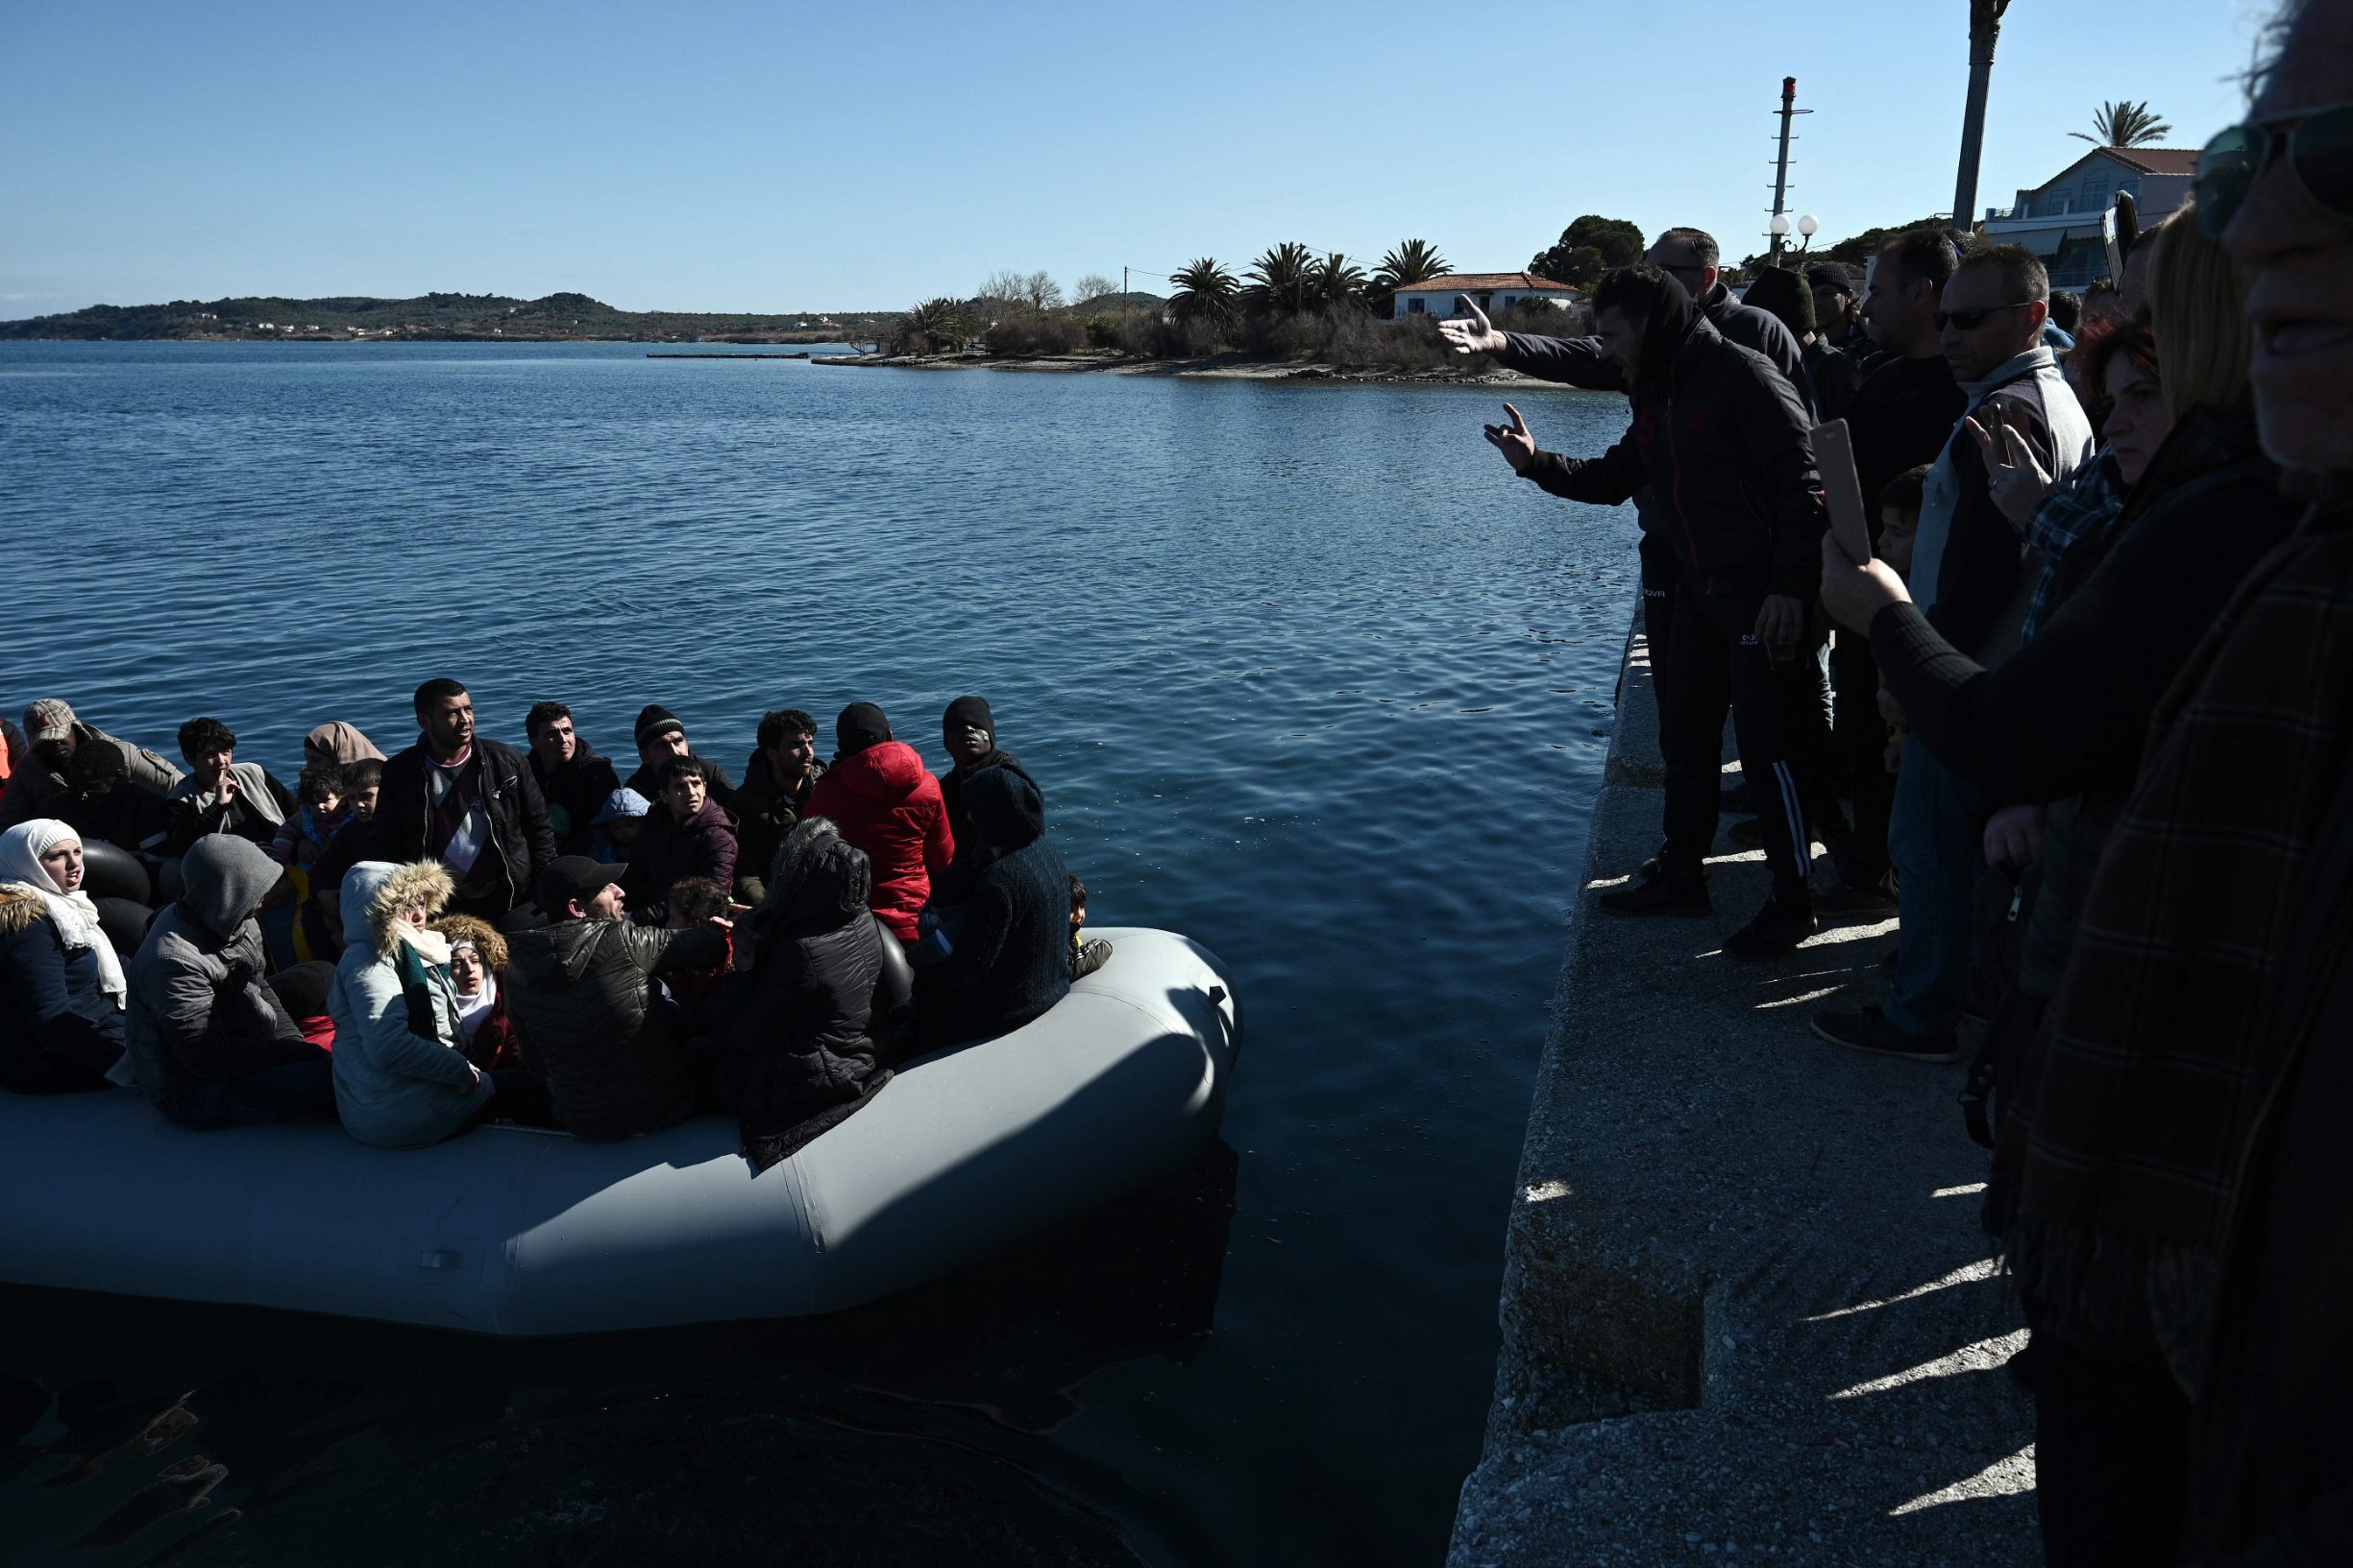 TOPSHOT - Migrants are seen on an inflatable boat as local residents prevent them from disembarking in Lesbos island, on March 1, 2020. - Greece said Sunday it has blocked nearly 10,000 migrants at its border with Turkey, which opened its gates to Europe as tensions mount over its deepening conflict in Syria. 
Migrant numbers have swelled along the rugged frontier after Turkey's president Recep Tayyip Erdogan said it 